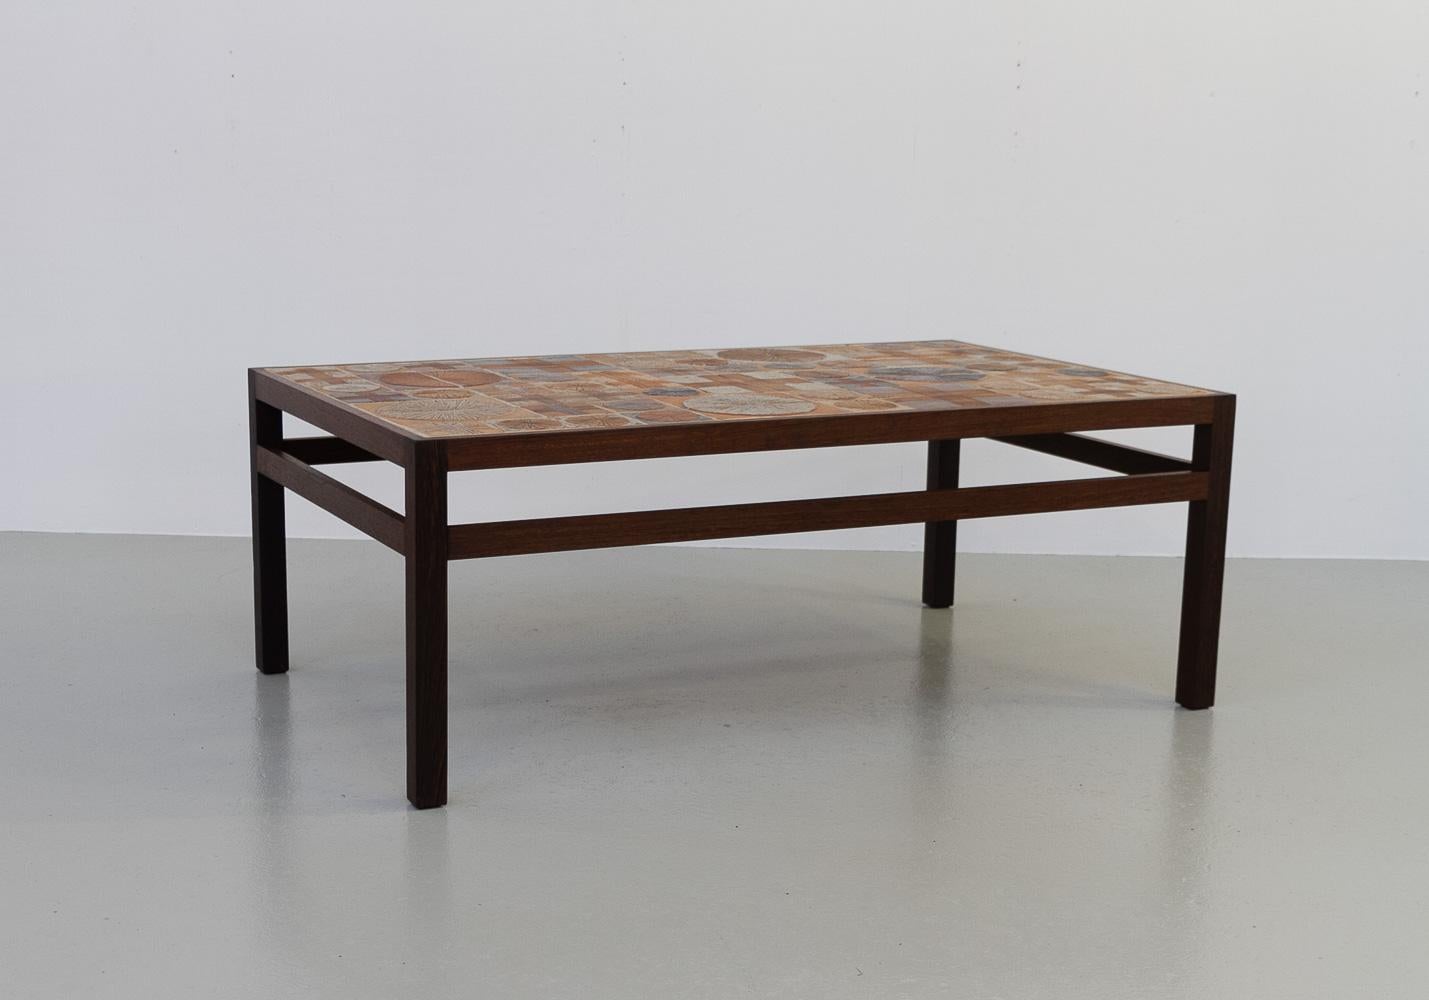 Danish Modern Tue Poulsen Tile Coffee Table in Wengé, 1960s.

Scandinavian Mid-Century Modern coffee table designed by artist and ceramist Tue Poulsen and furniture designer Erik Wørtz. Produced by Willy Beck in Denmark, 1960s.

This unique lounge